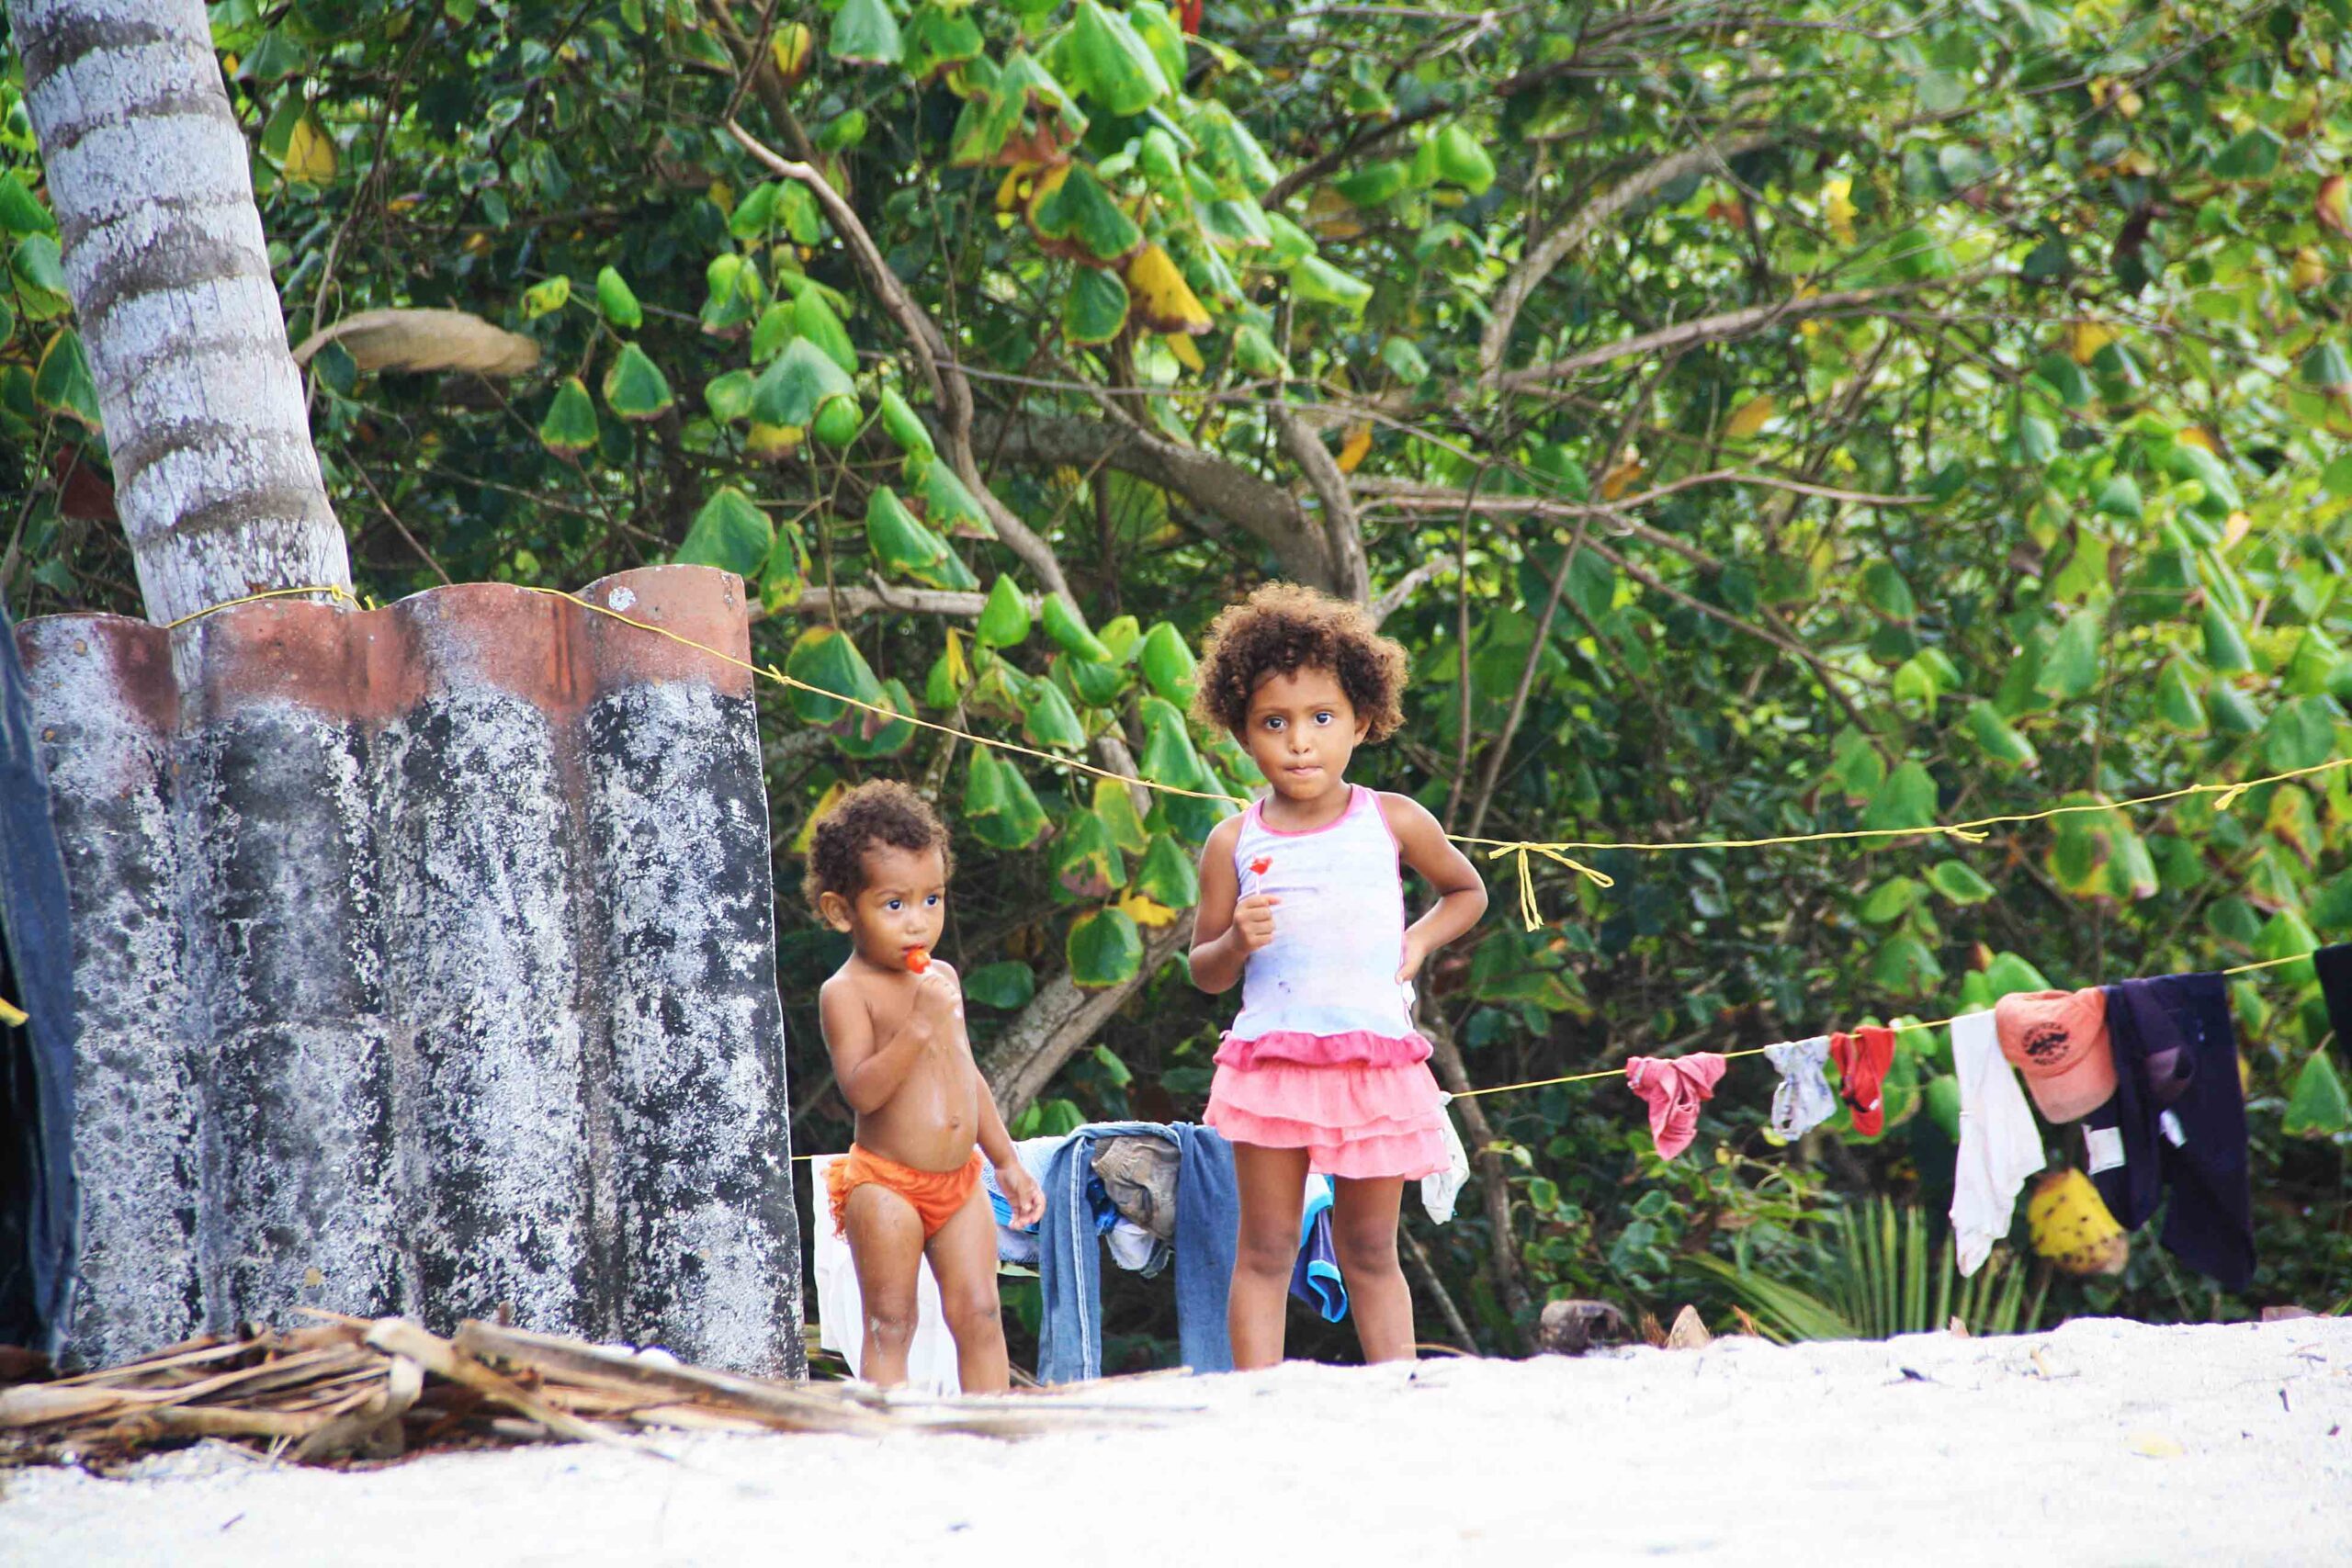 Local children at the Caribbean Coast of Colombia